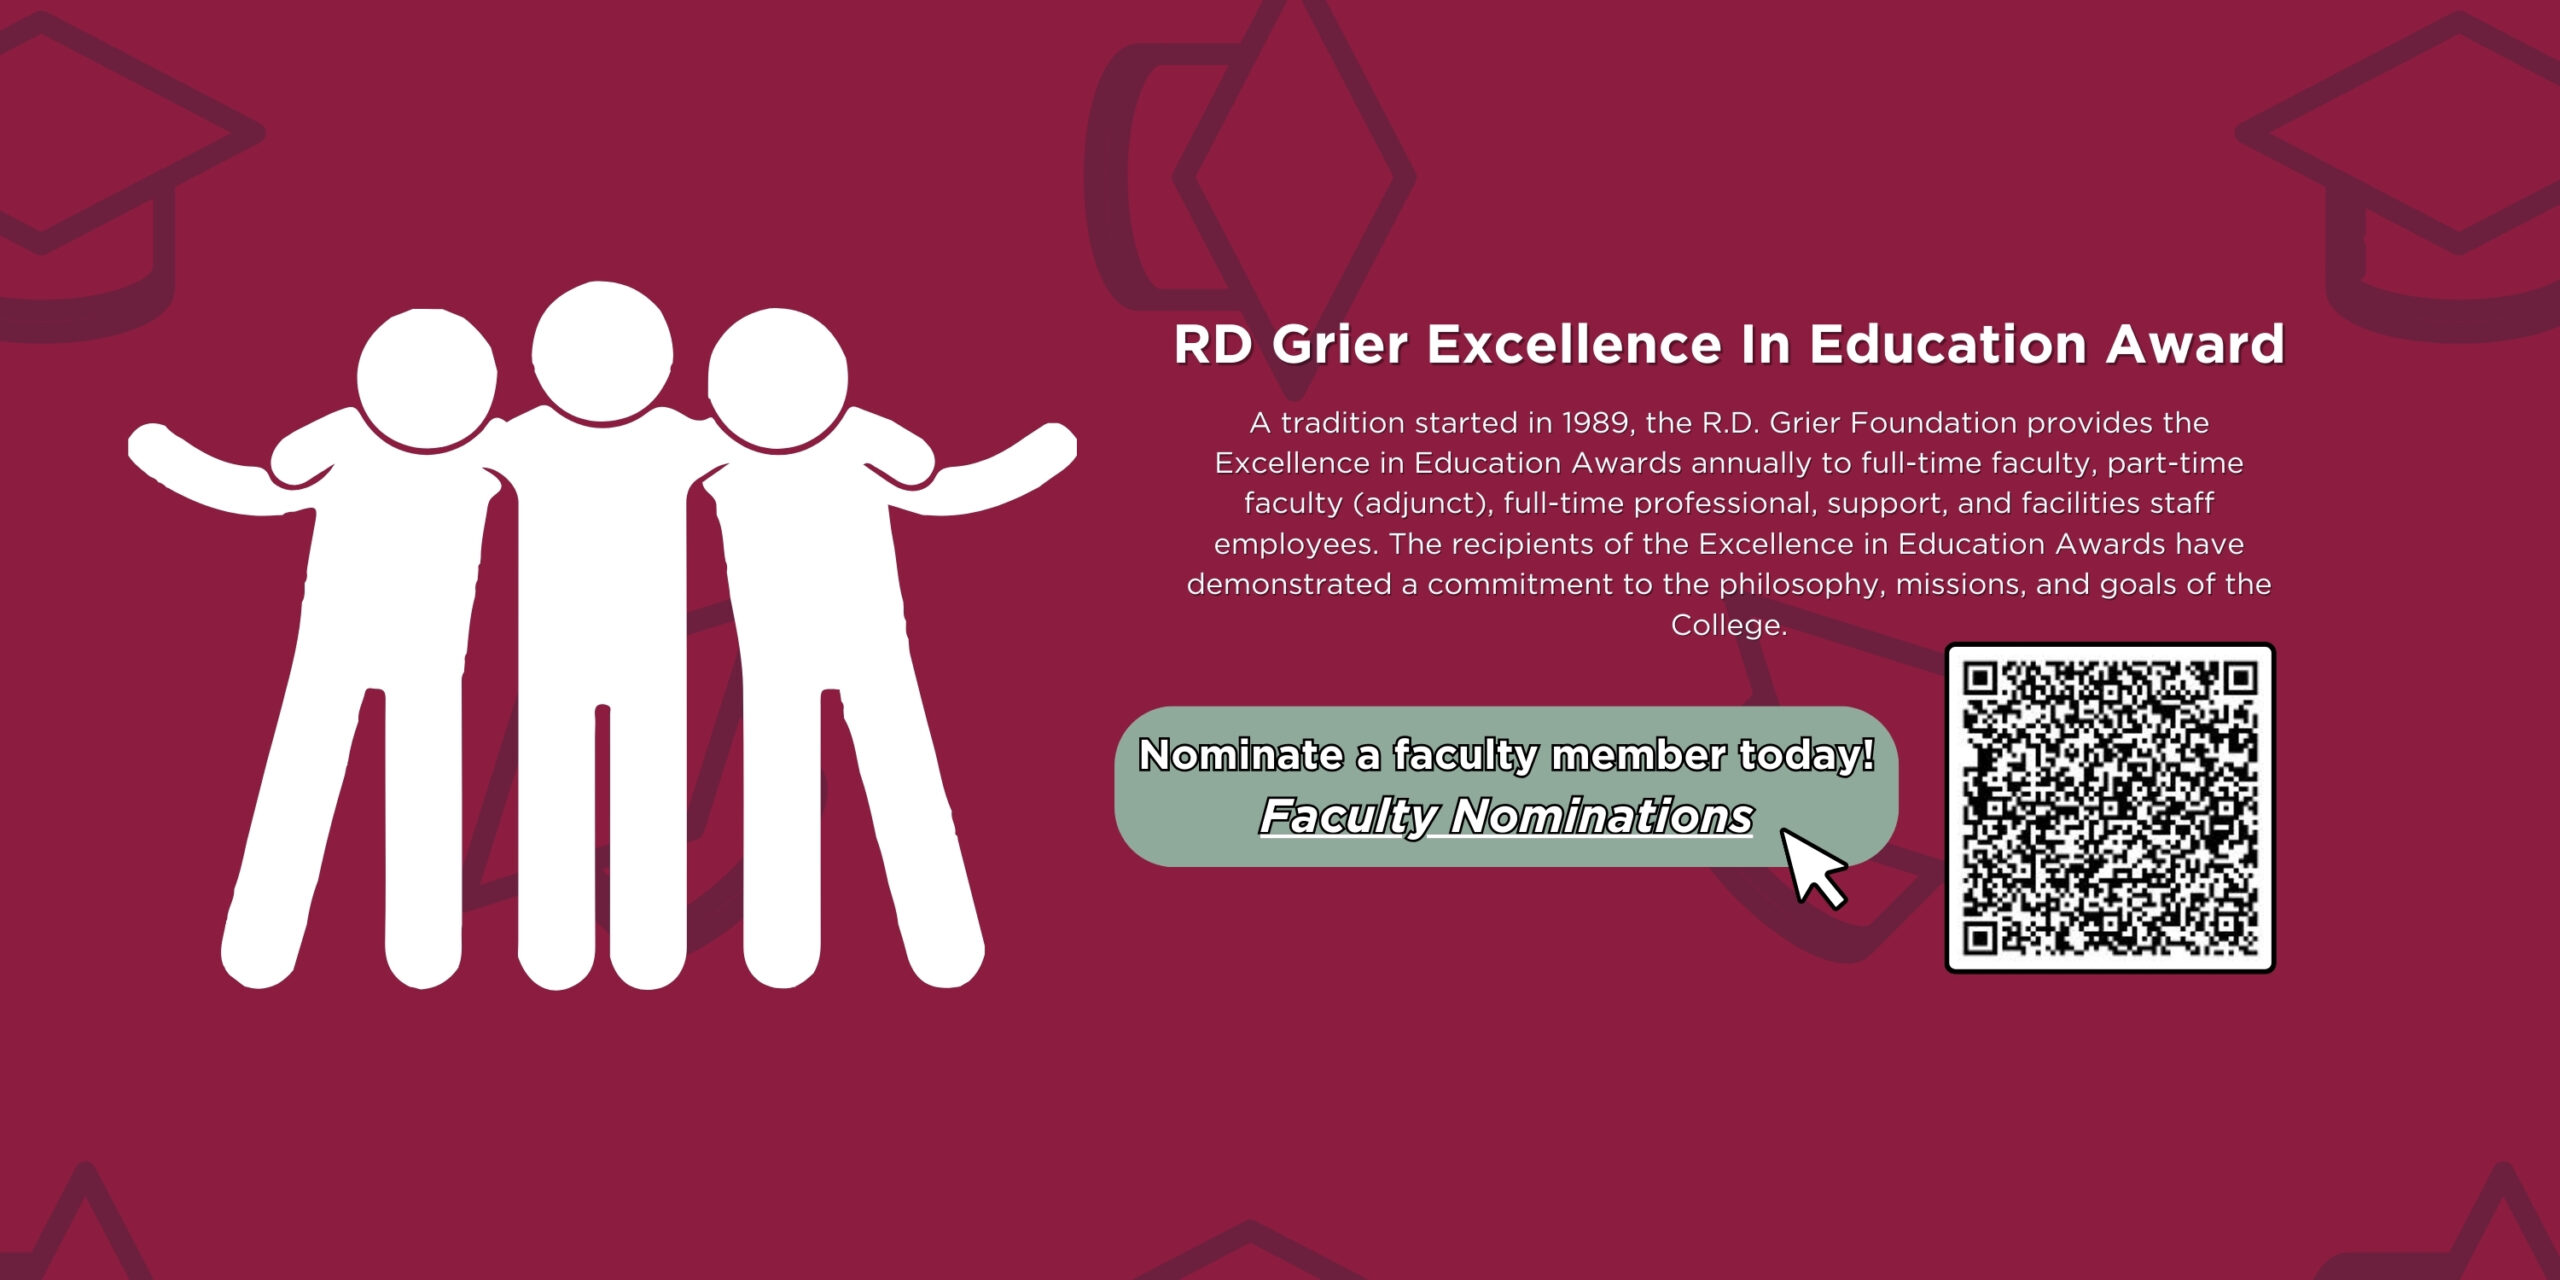 Slider that says "RD Grier Excellence In Education Award | A tradition started in 1989, the R.D. Grier Foundation provides the Excellence in Education Awards annually to full-time faculty, part-time faculty (adjunct), full-time professional, support, and facilities staff employees. The recipients of the Excellence in Education Awards have demonstrated a commitment to the philosophy, missions, and goals of the College. | Nominate a faculty member today! Faculty Nominations" Click the banner or scan the QR code to access the faculty nomination form.